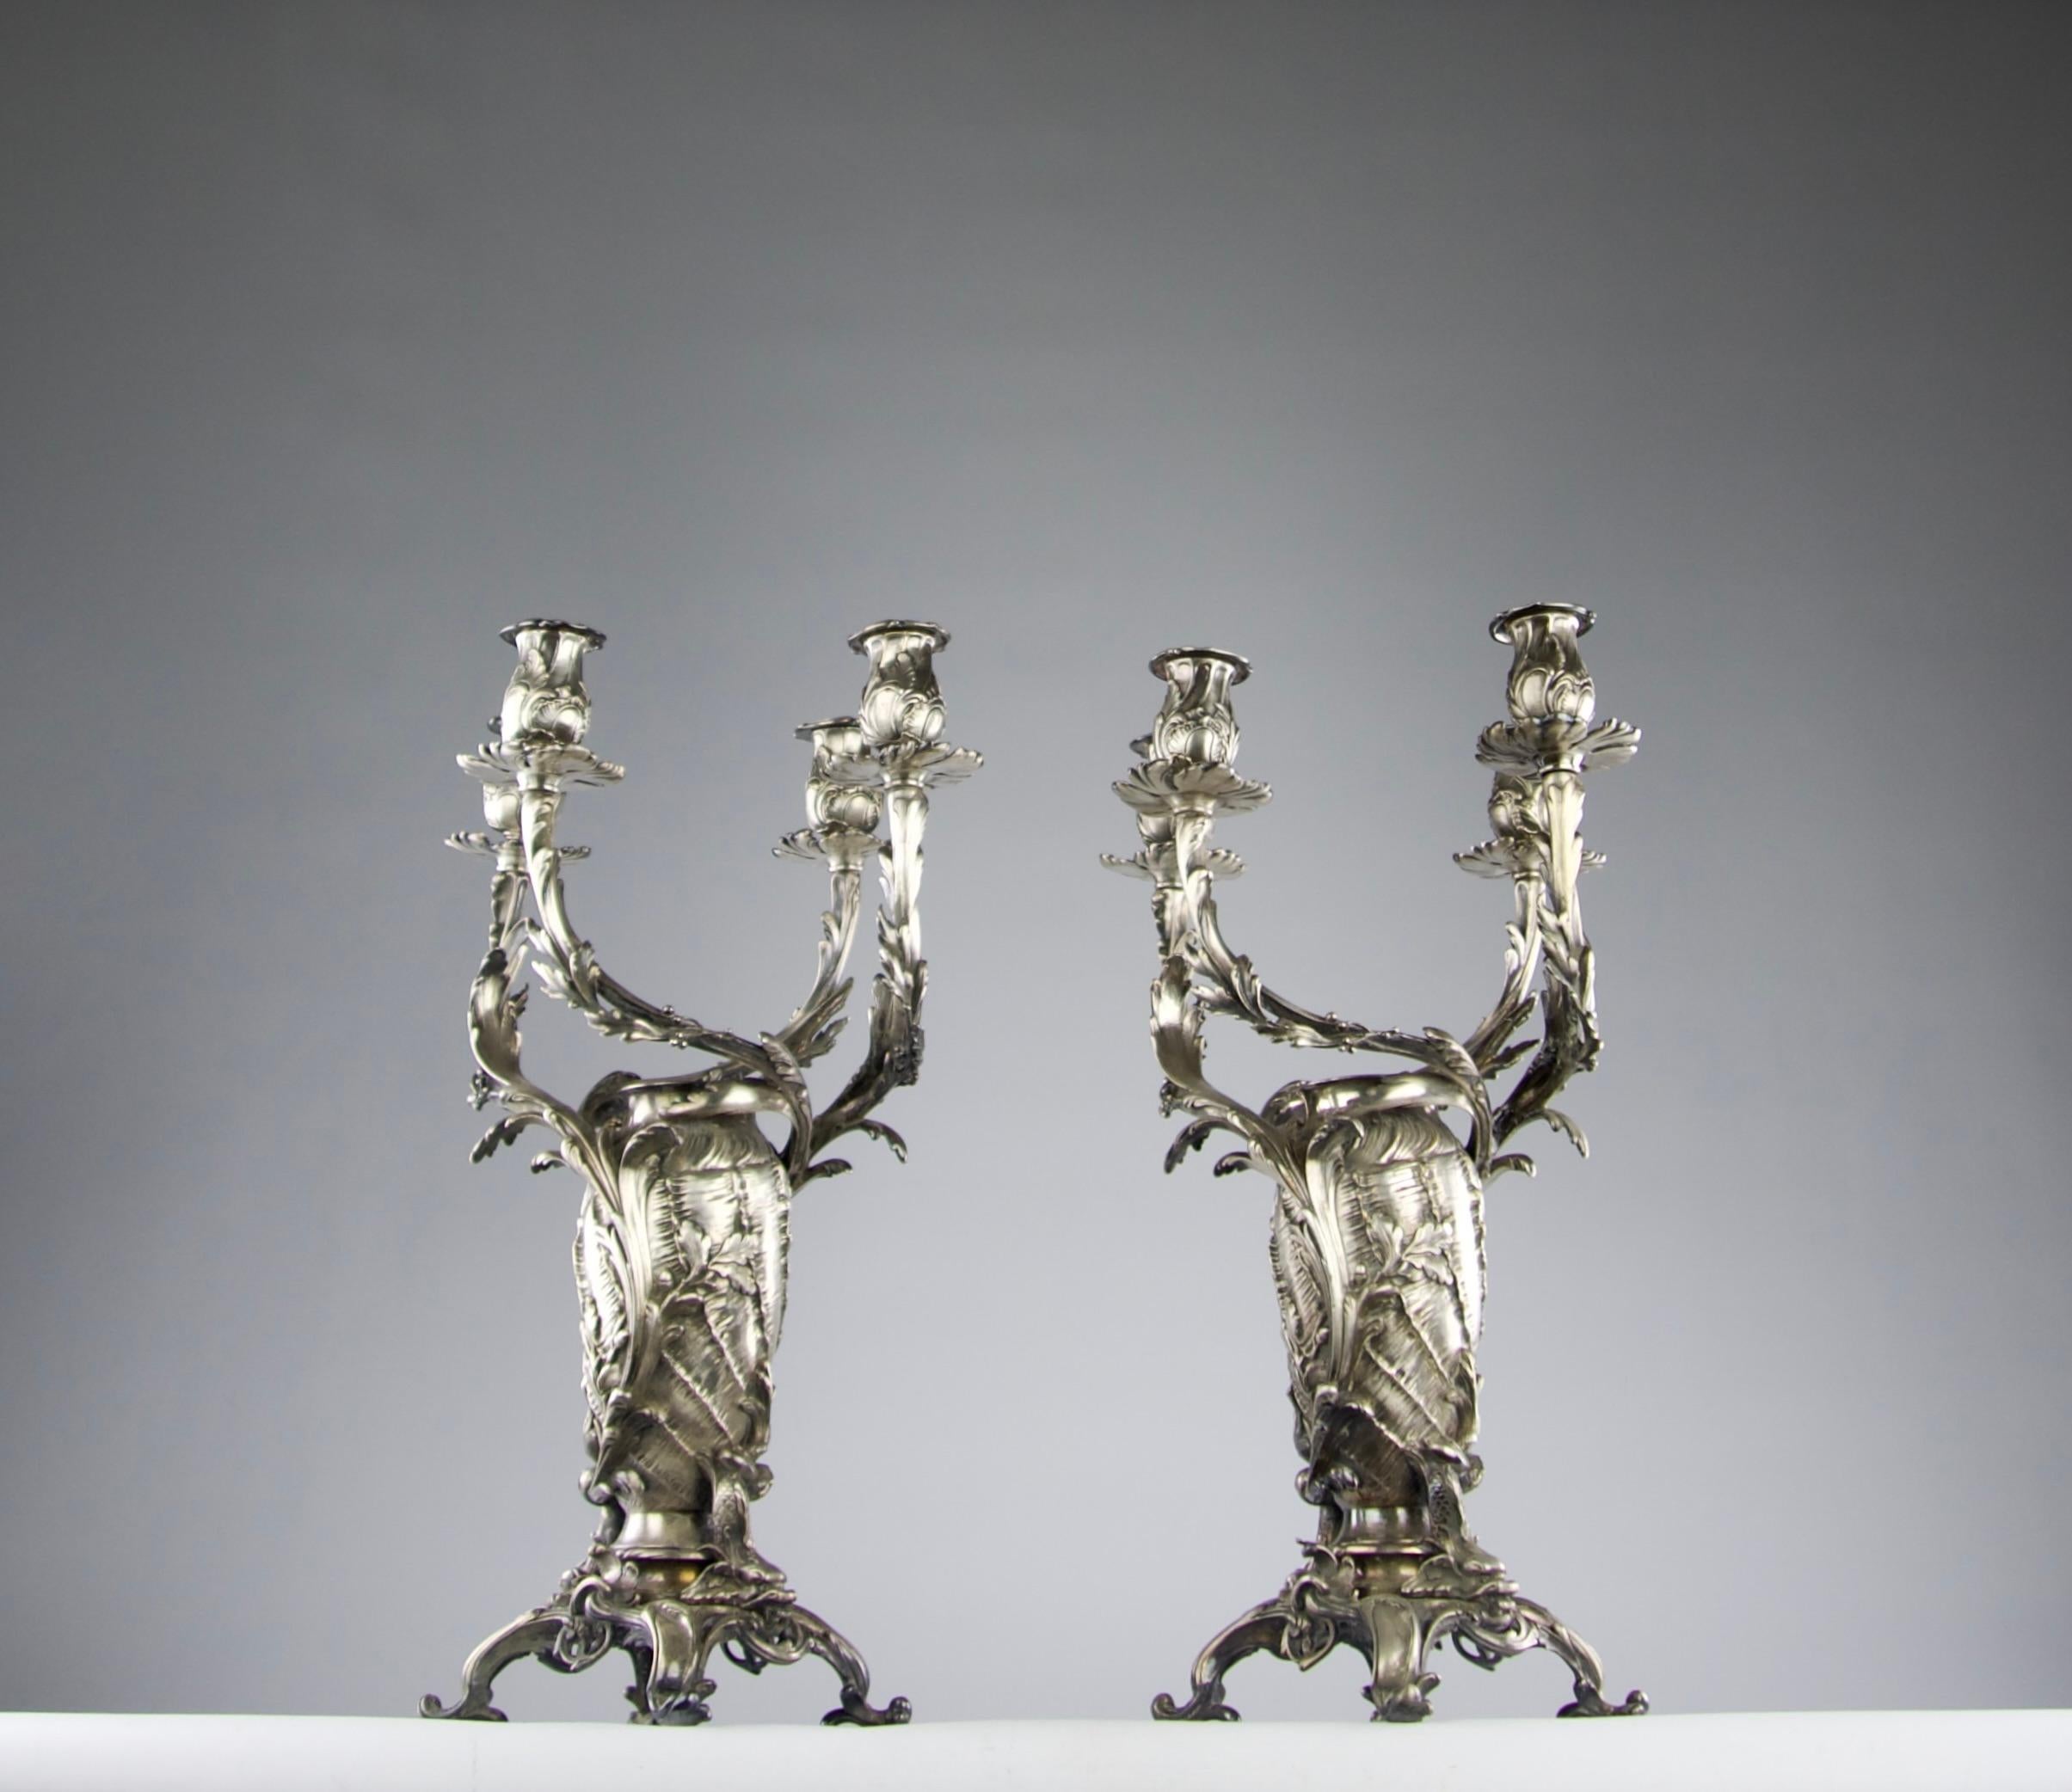 Superb pair of 19th century Christofle Rococo/Rocaille/Louis XV silver-plated candelabra.

Very good condition. Oxidation.

Dimensions in cm ( H x D ) : 46 x 33

Secure shipping